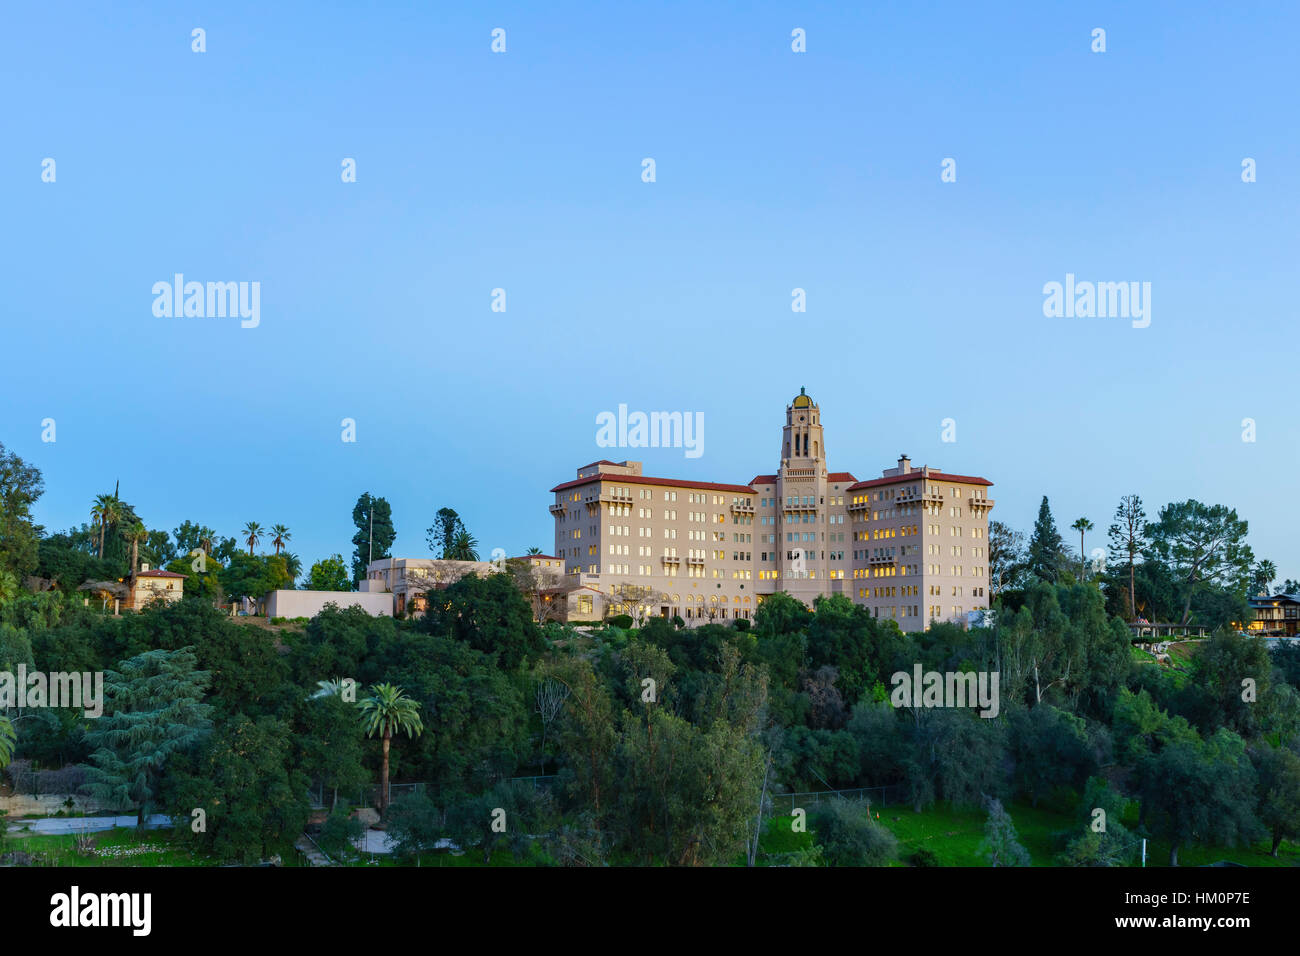 Twilight view of the Richard H. Chambers Courthouse in Pasadena, California, USA Stock Photo